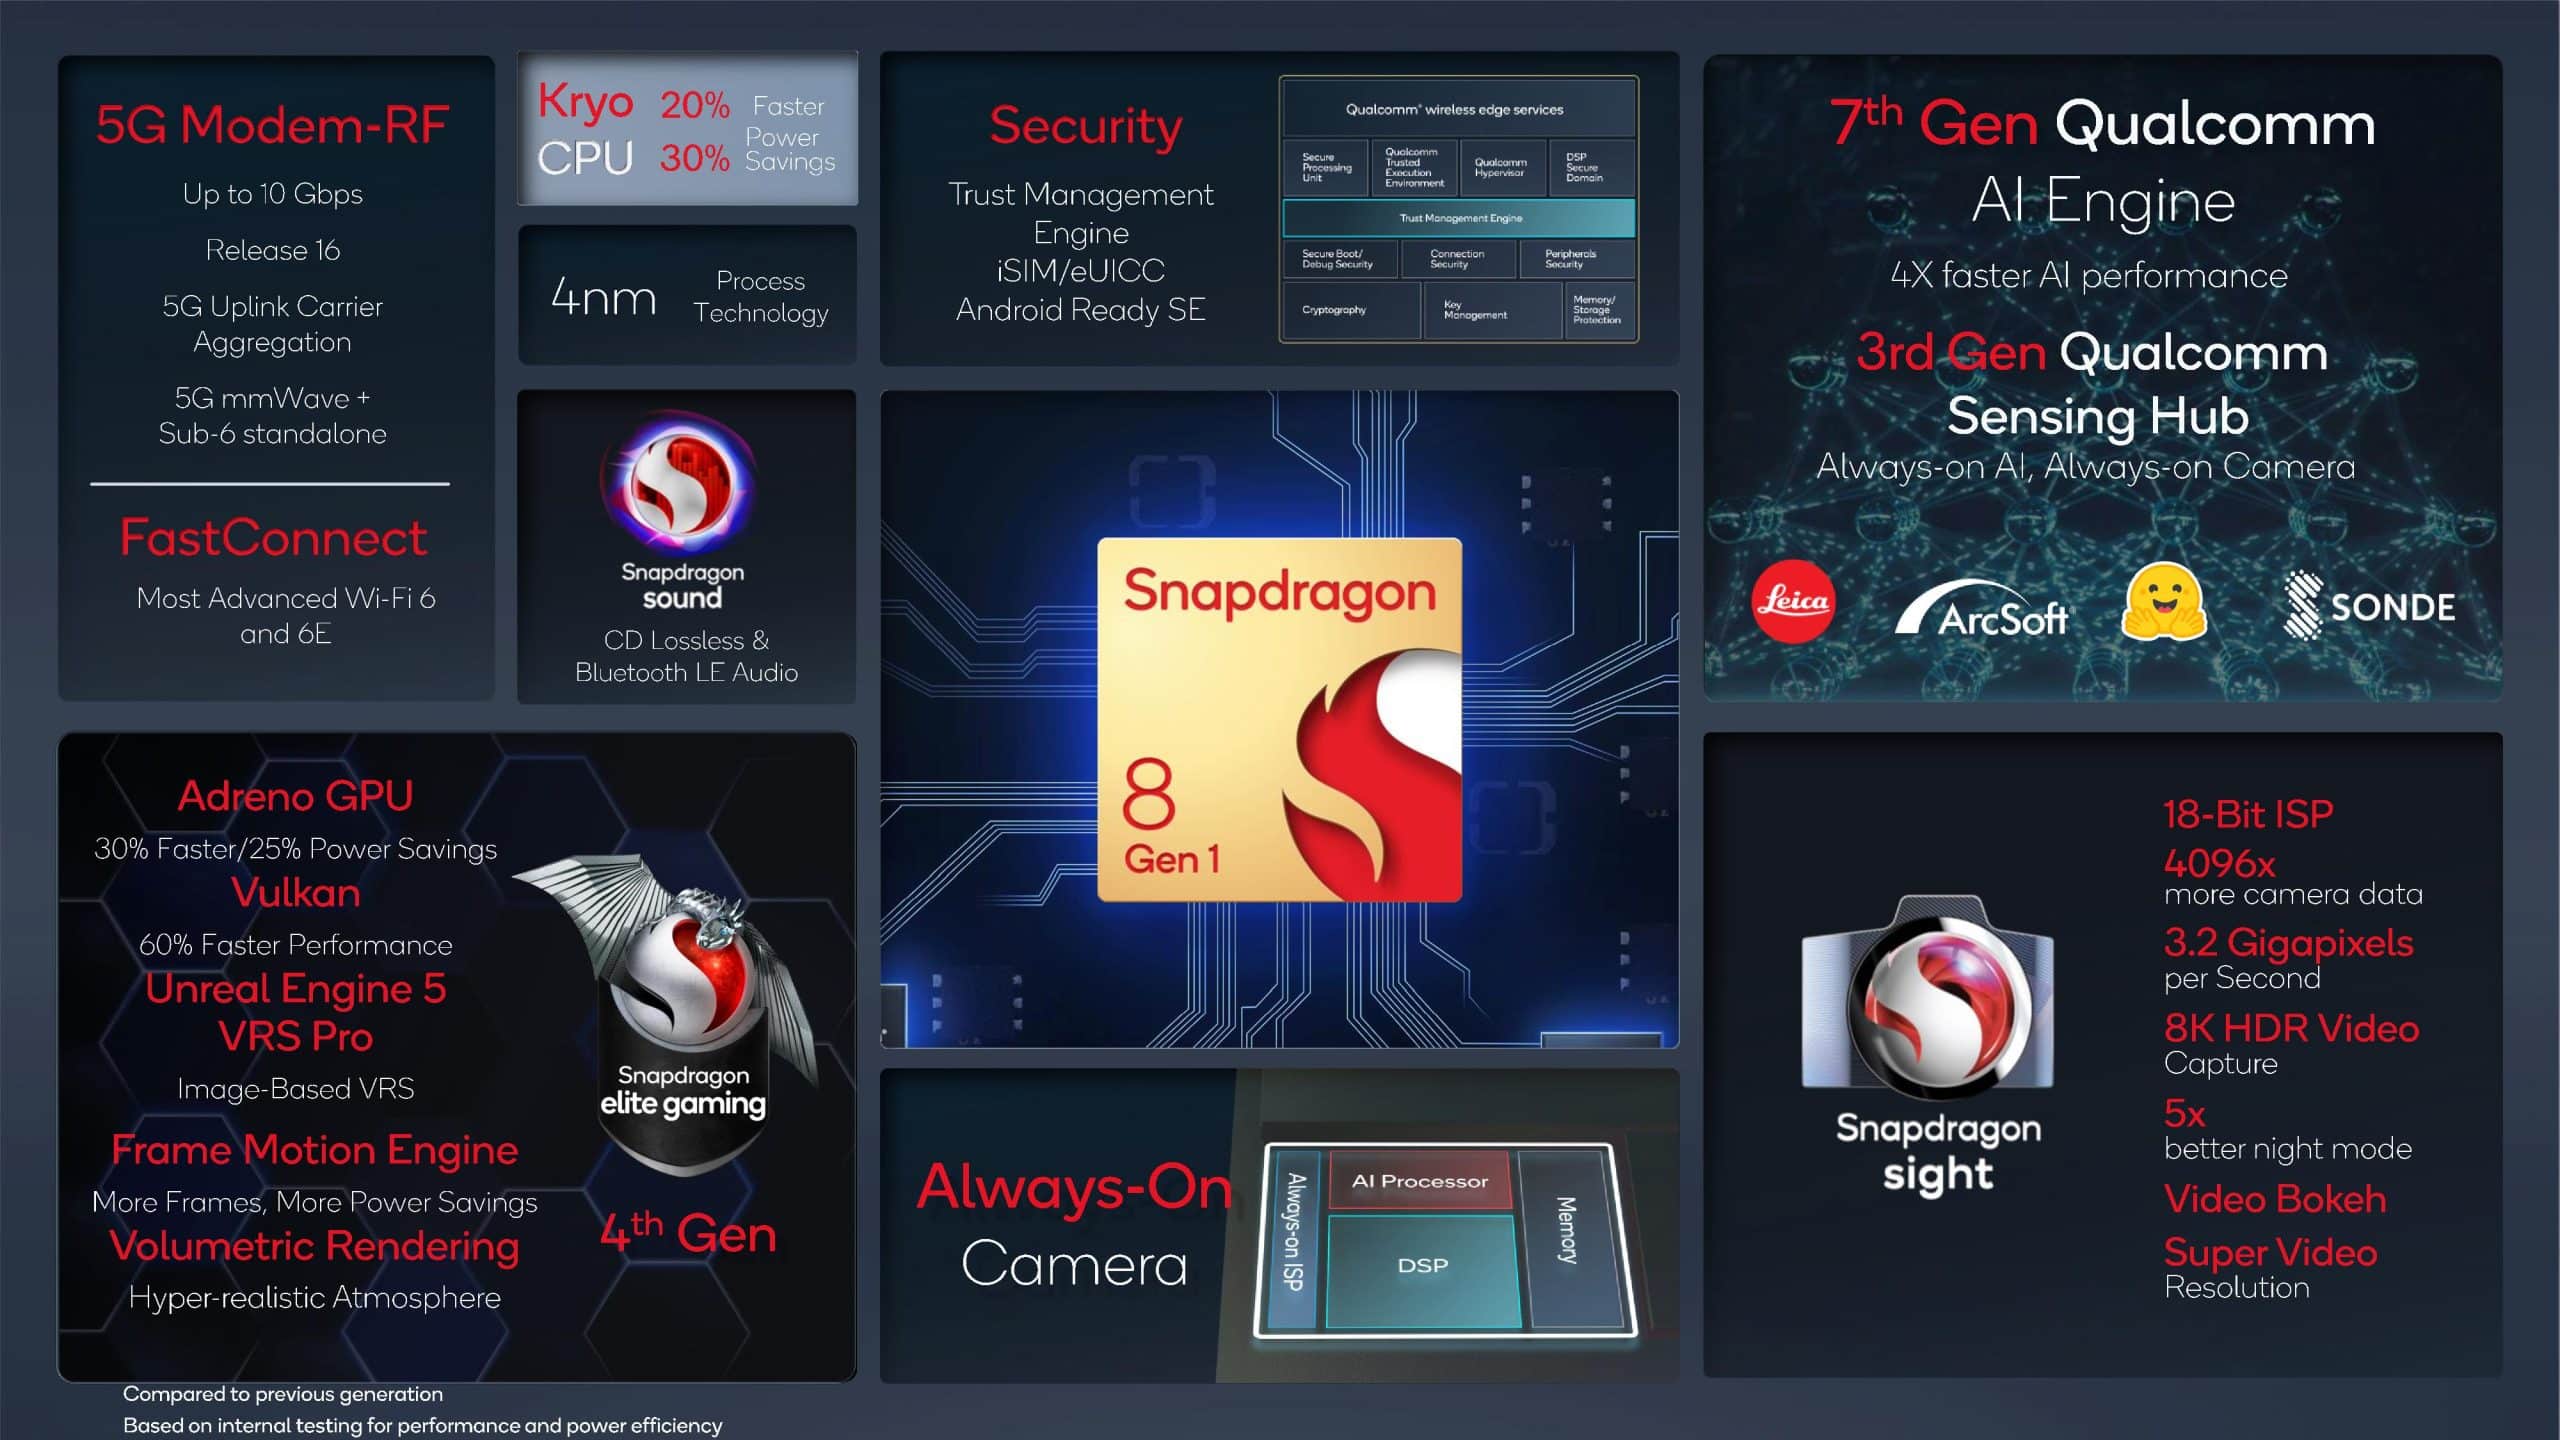 Qualcomm Snapdragon G1 Gen 1: The Base Version for Cloud Streaming